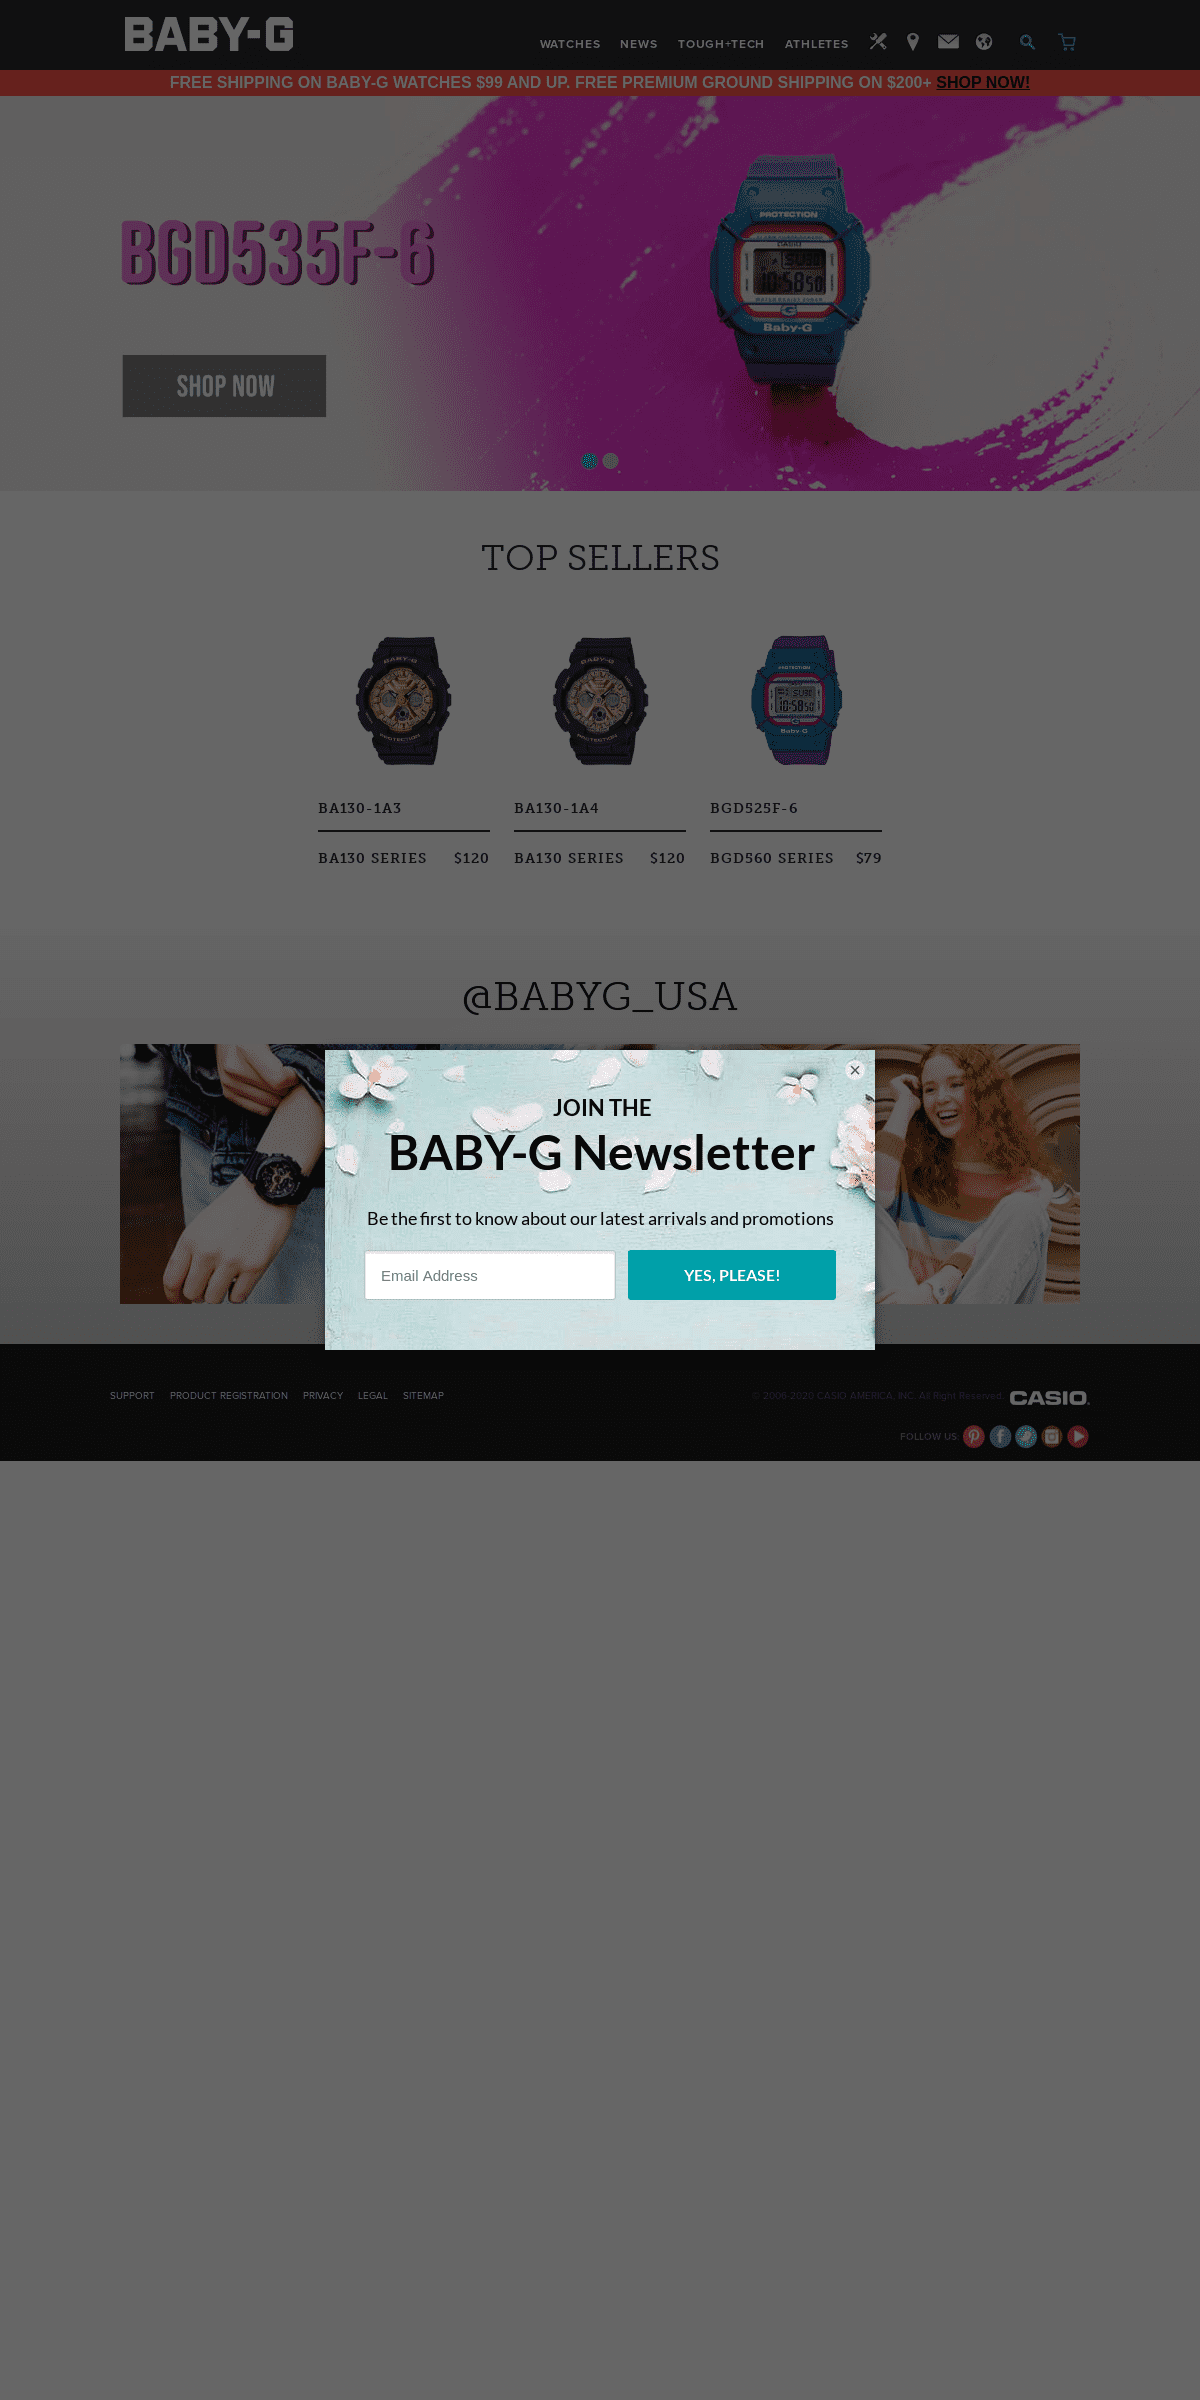 A complete backup of baby-g.com